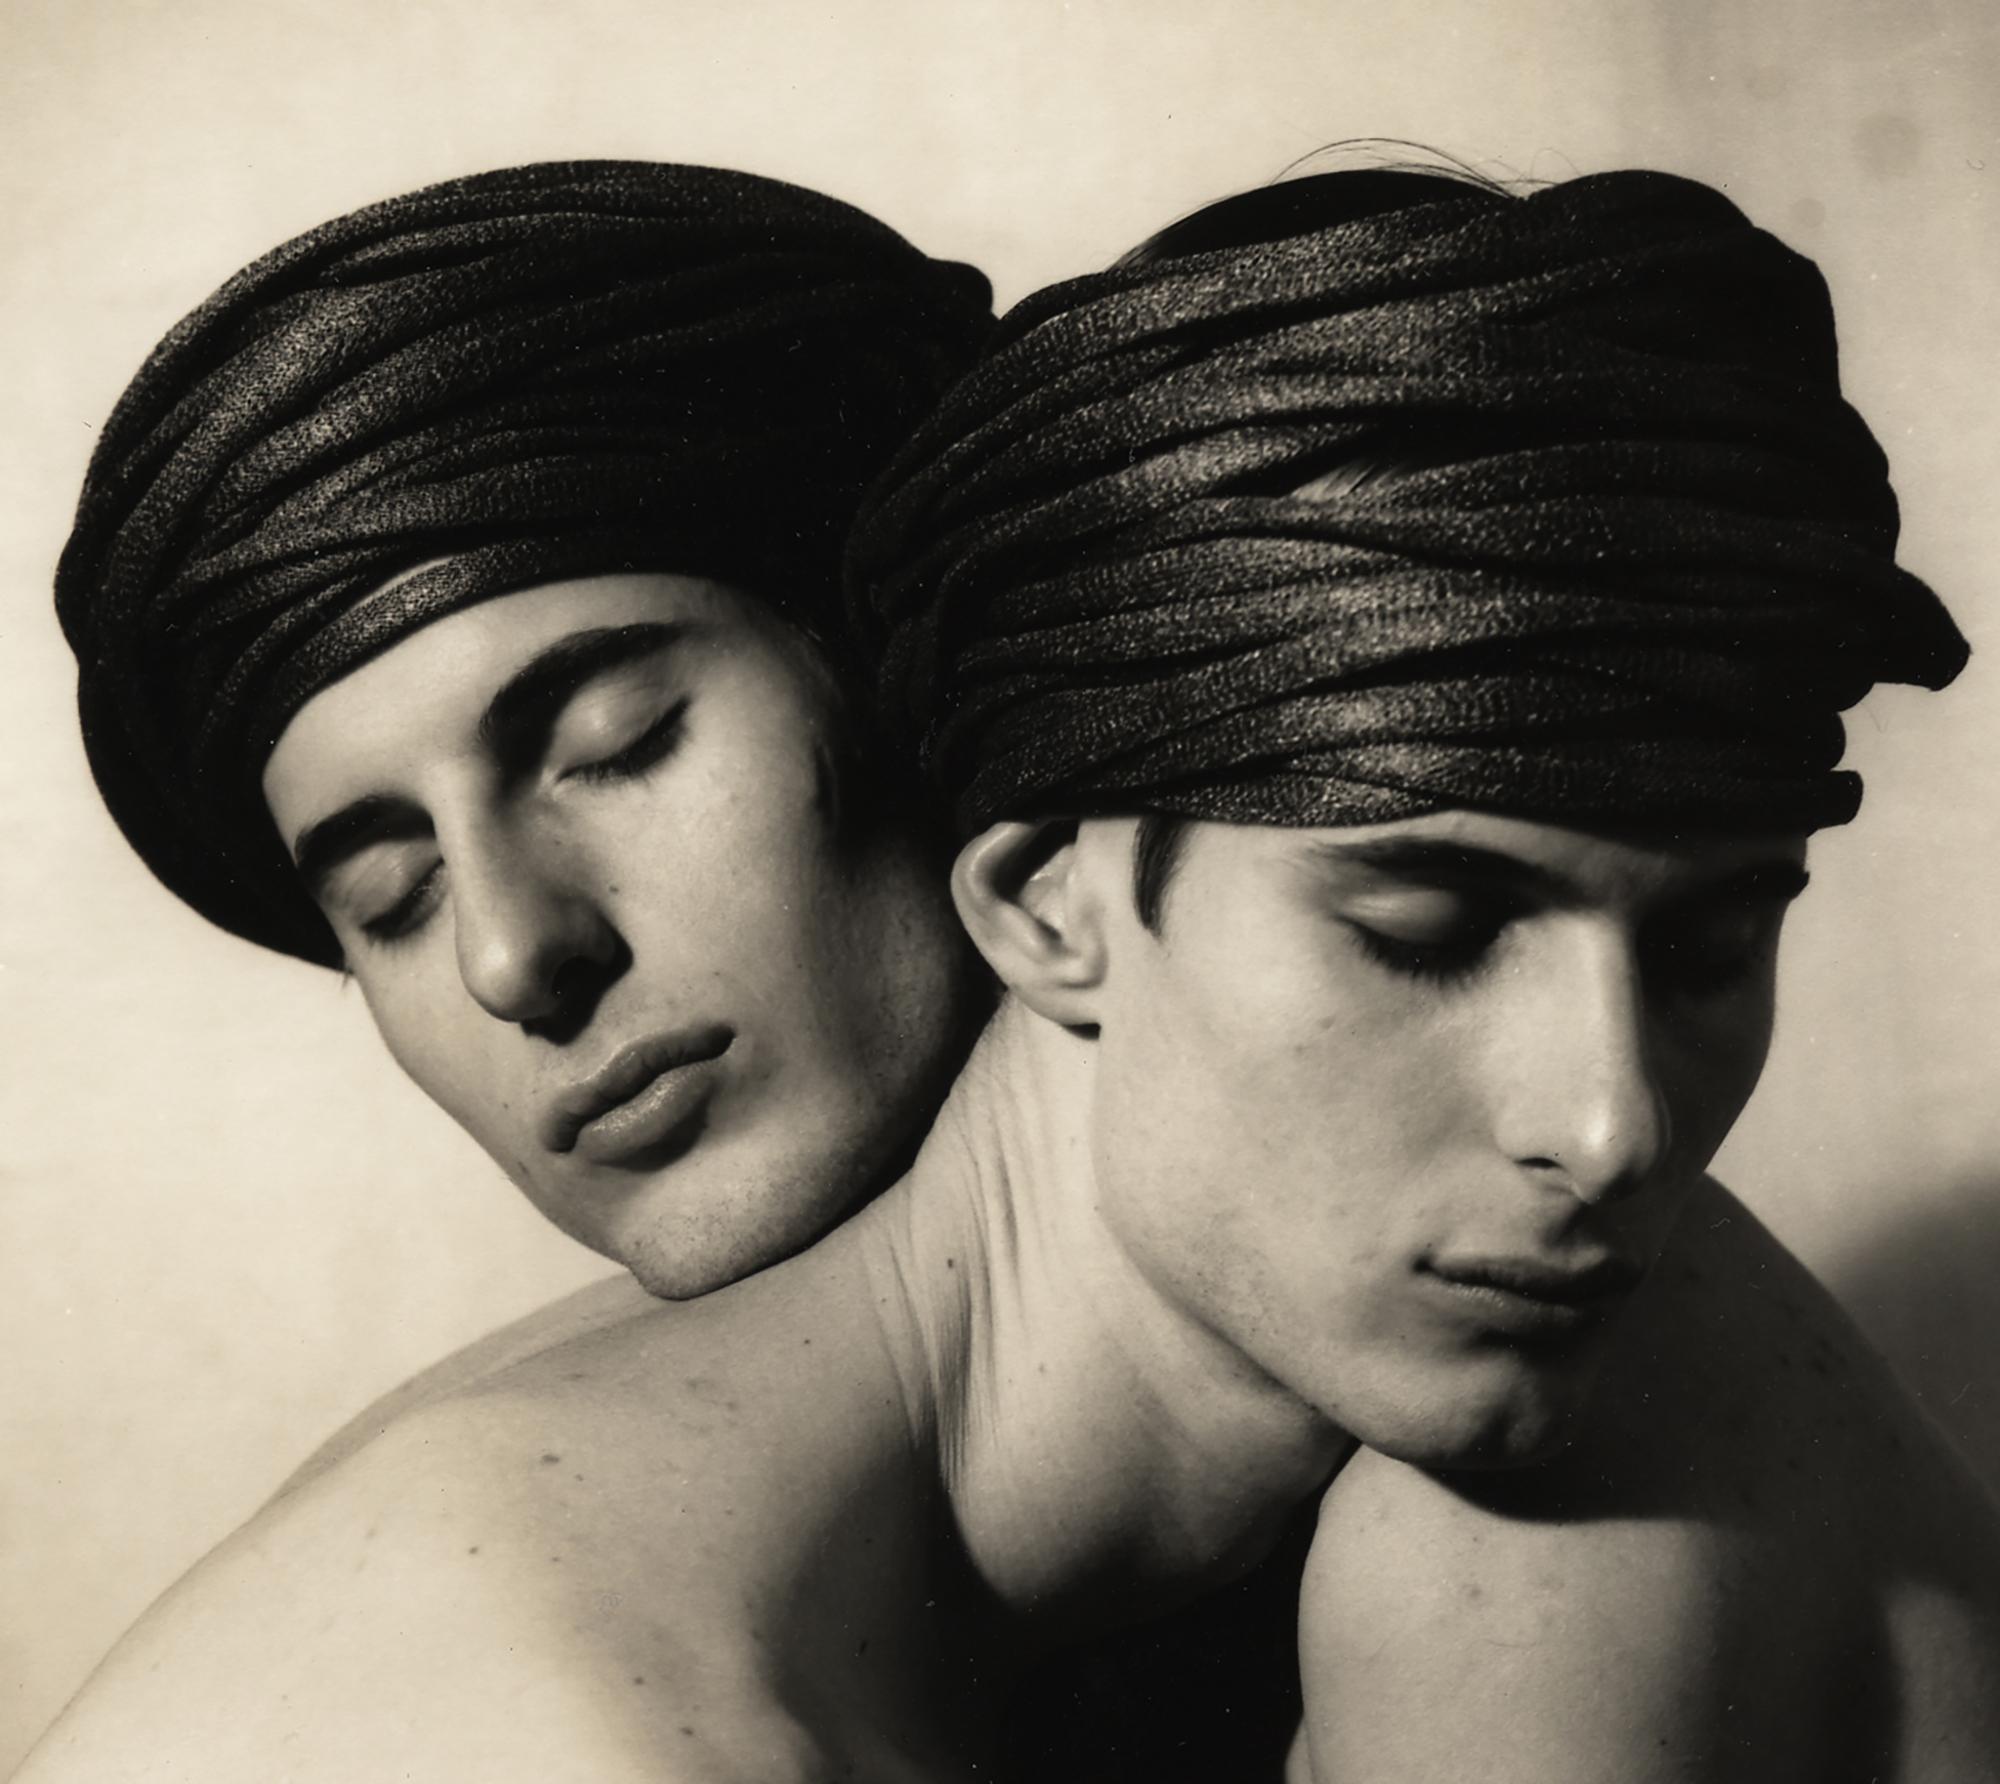 Twins Entwined, 1991: Photographed by Ron Baxter Smith.
Identical Twins, Mark and Ian, shot together in a studio portrait.
Shot with 4 x 5 Polaroid Type 55 Positive/Negative; Sinar & Rodenstock for technical sharpness.

Archival Pigment Print in an